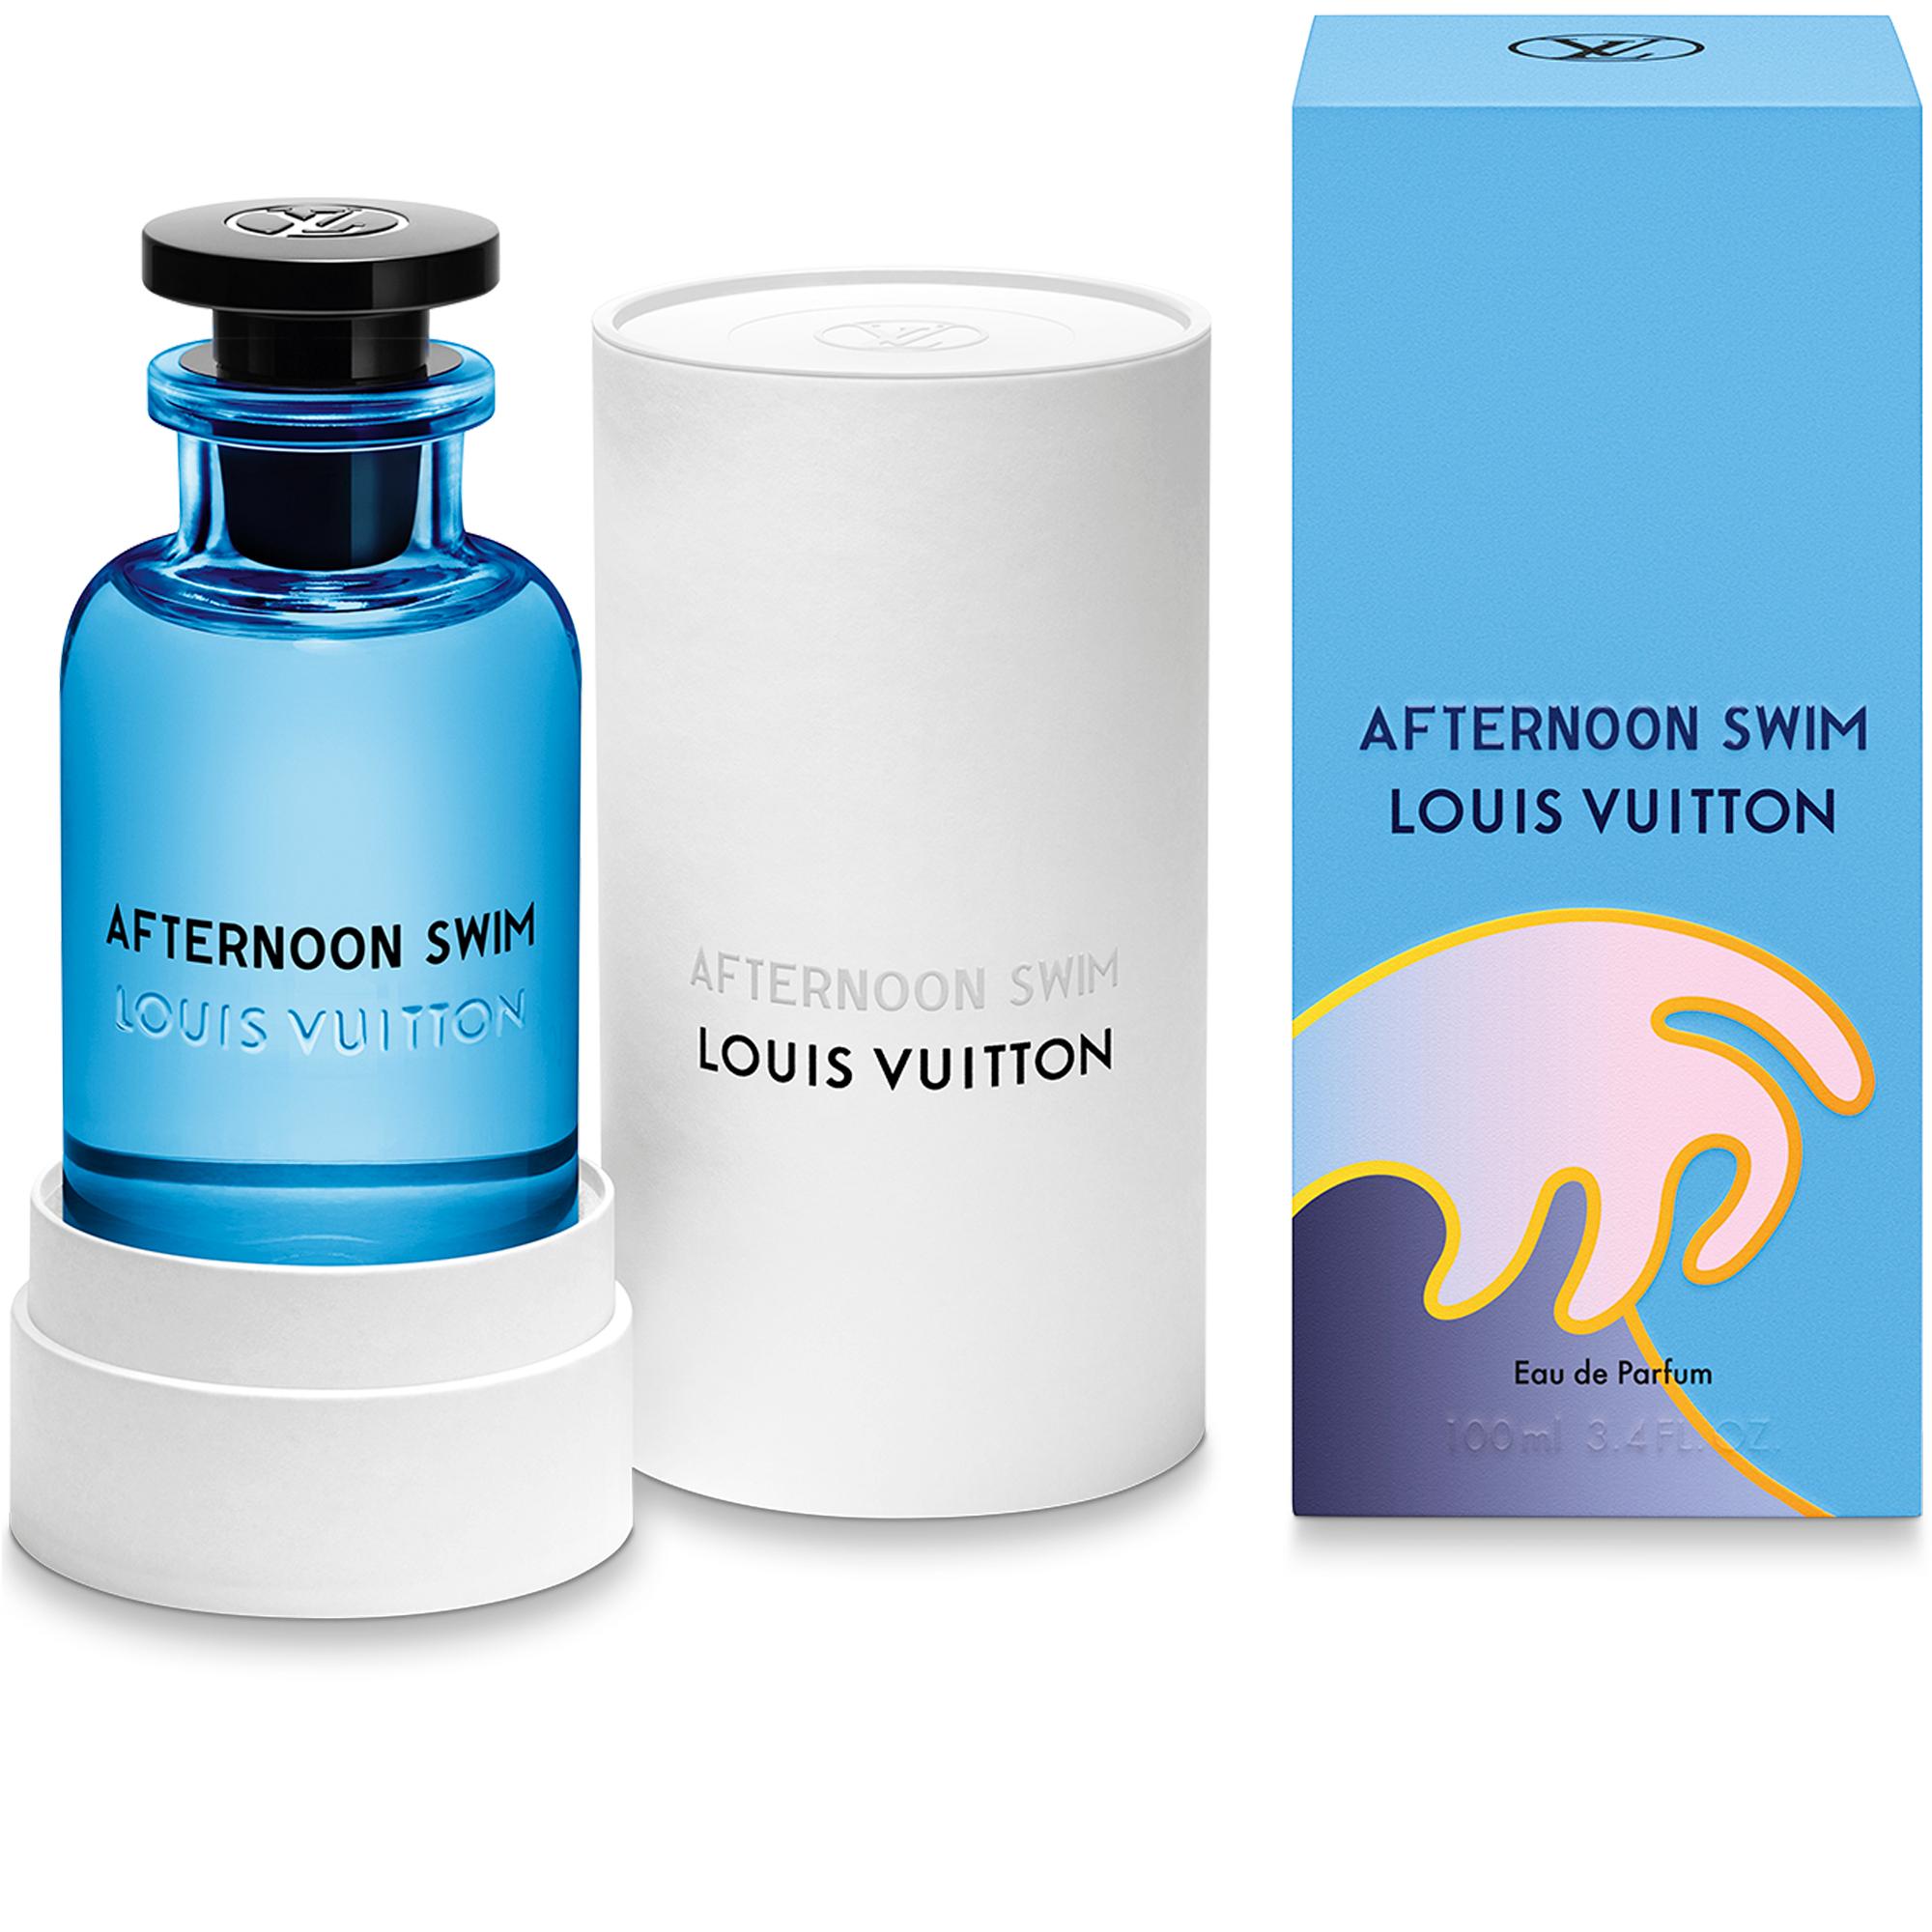 LOUIS VUITTON AFTERNOON SWIM – Rich and Luxe